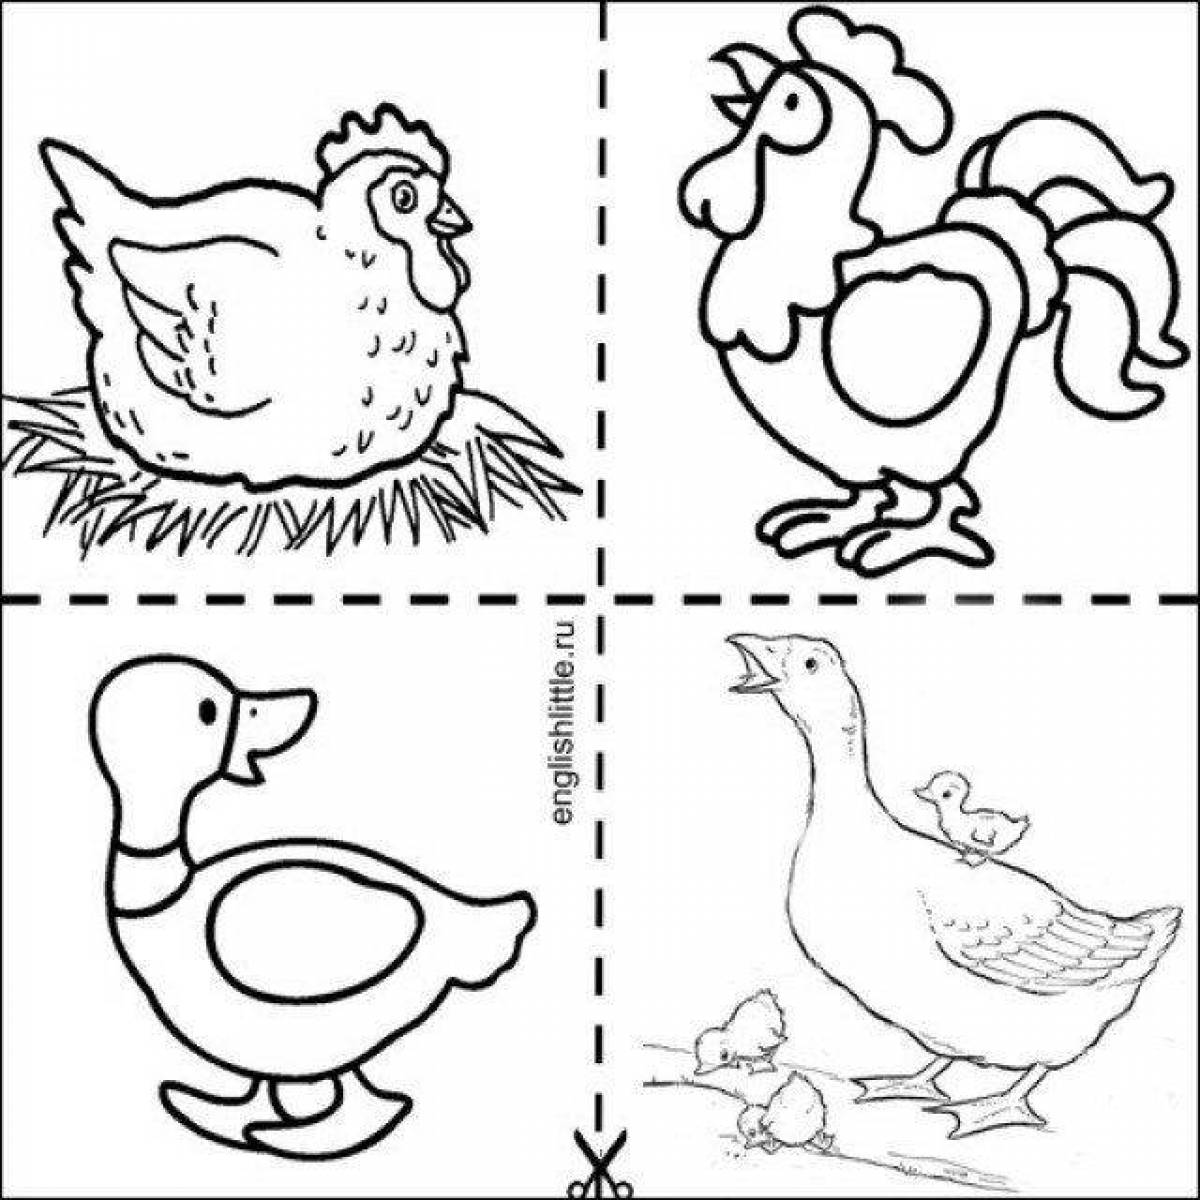 Adorable pets coloring book for kids 3-4 years old